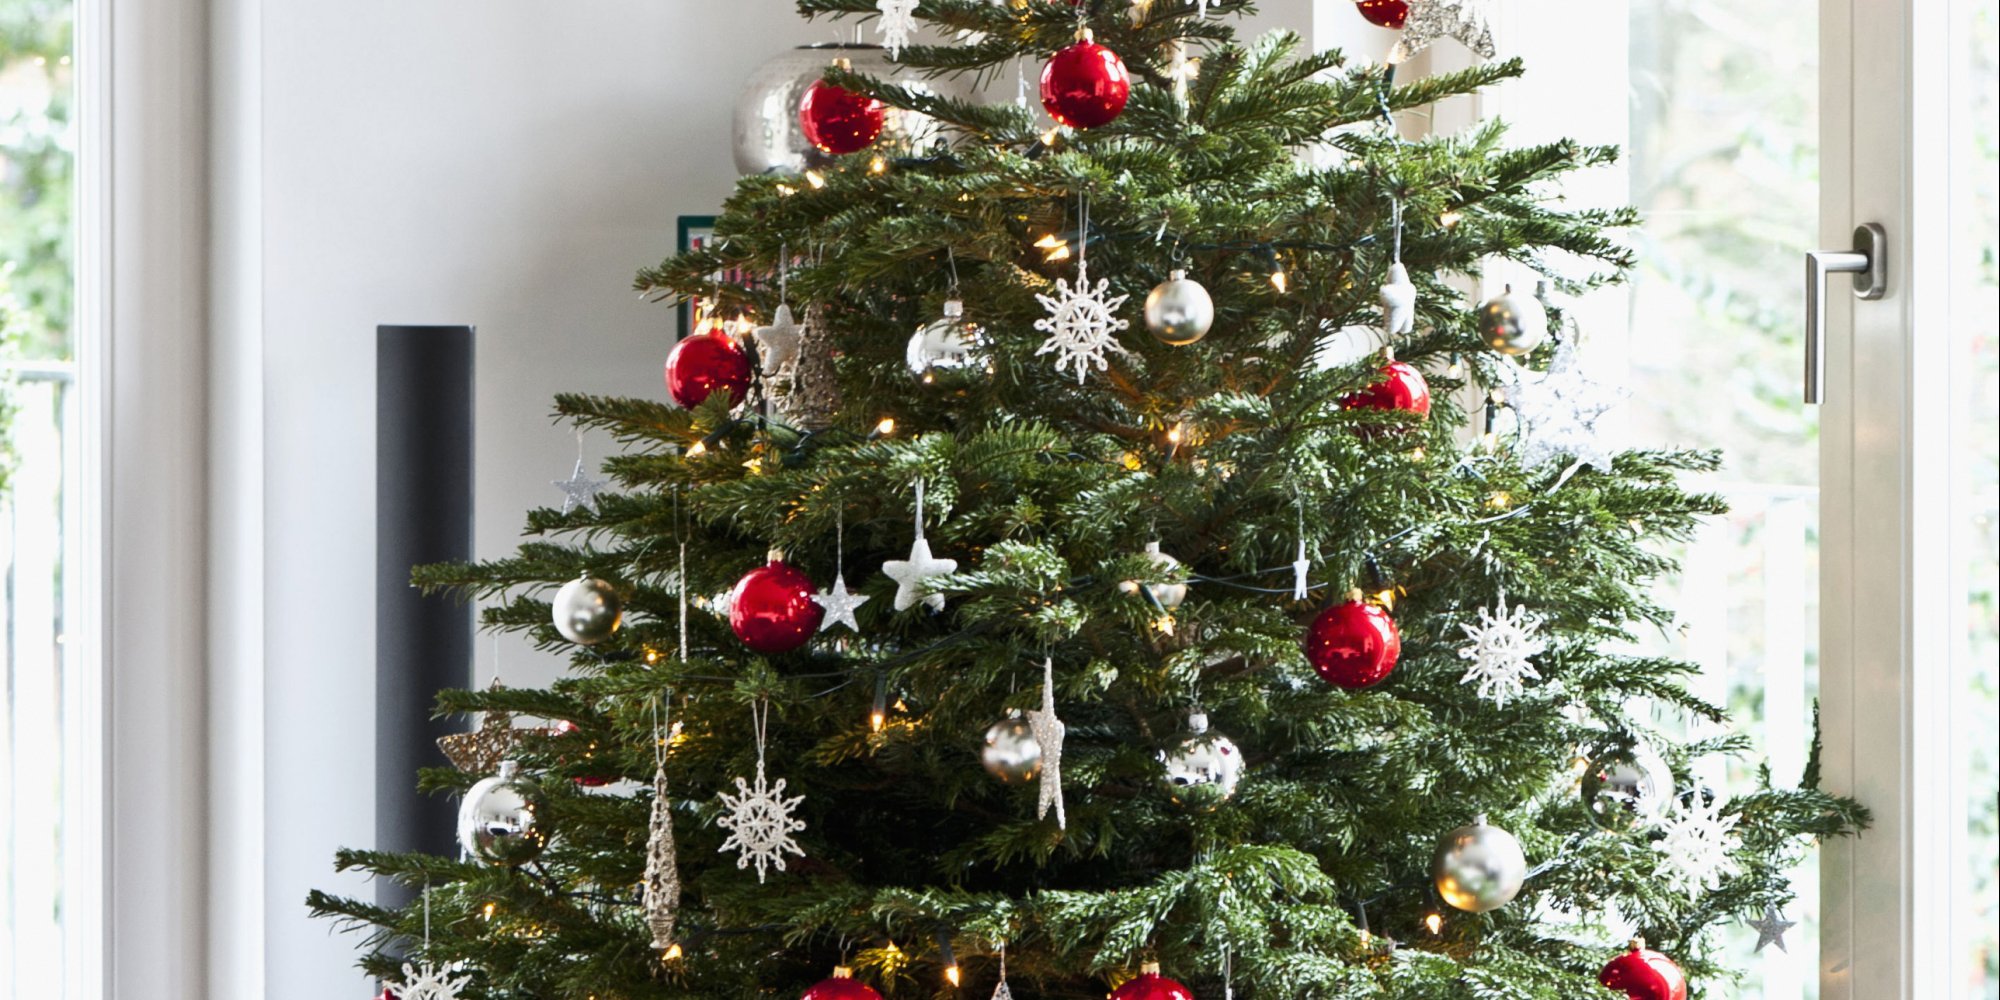 7 Things That Could Help Your Christmas Tree Live Longer | 105.5 The ...